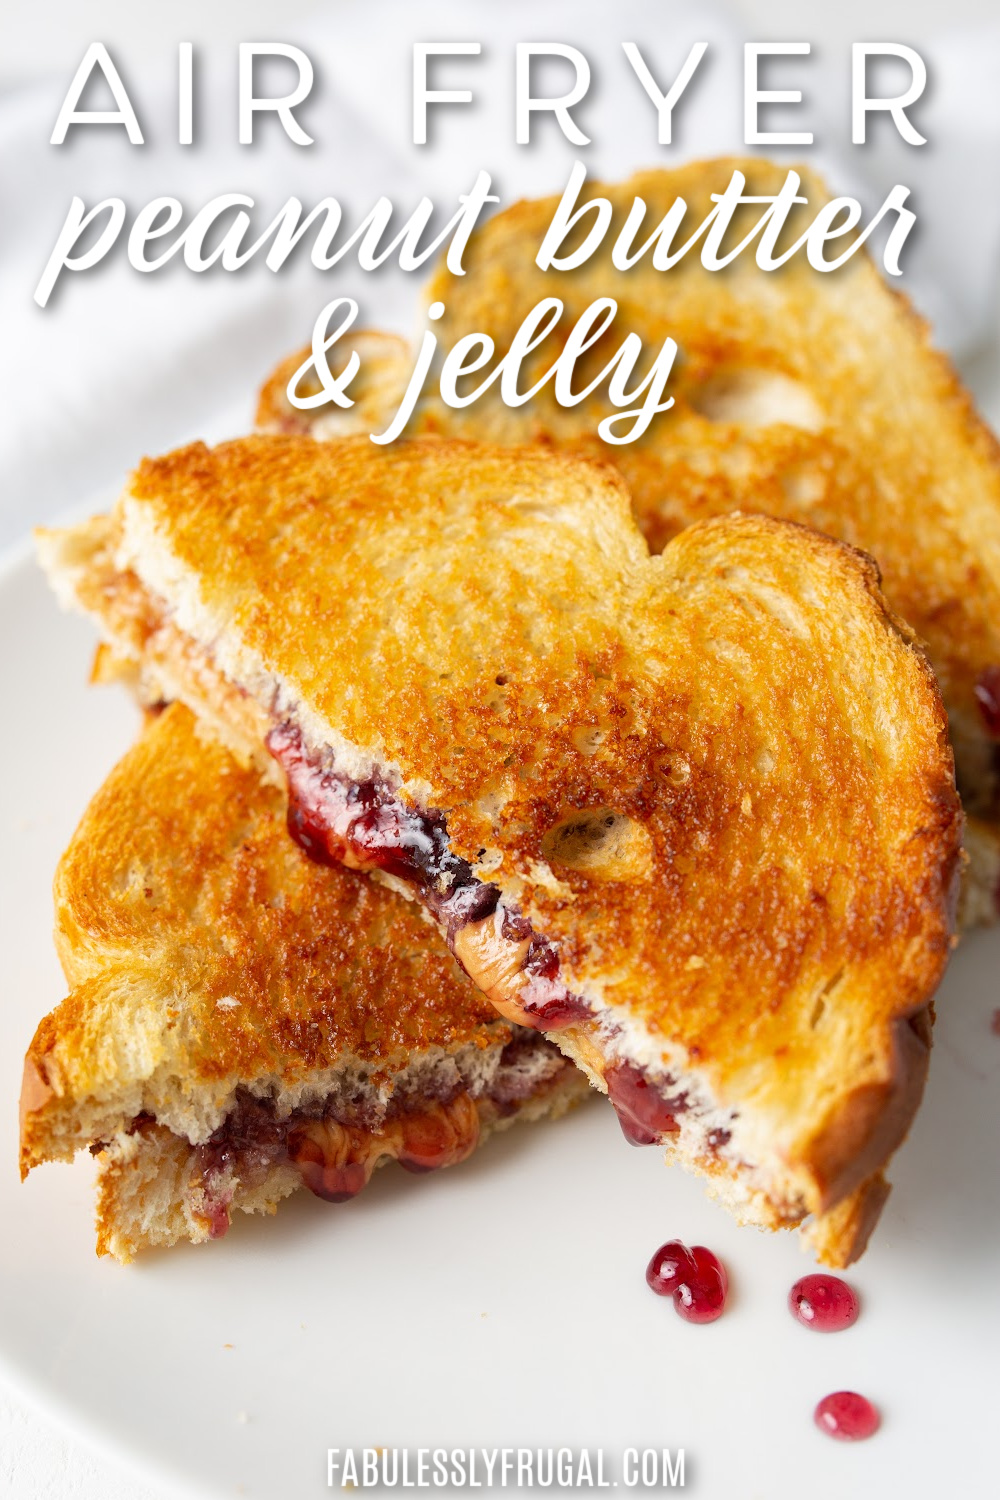 air fryer peanut butter and jelly